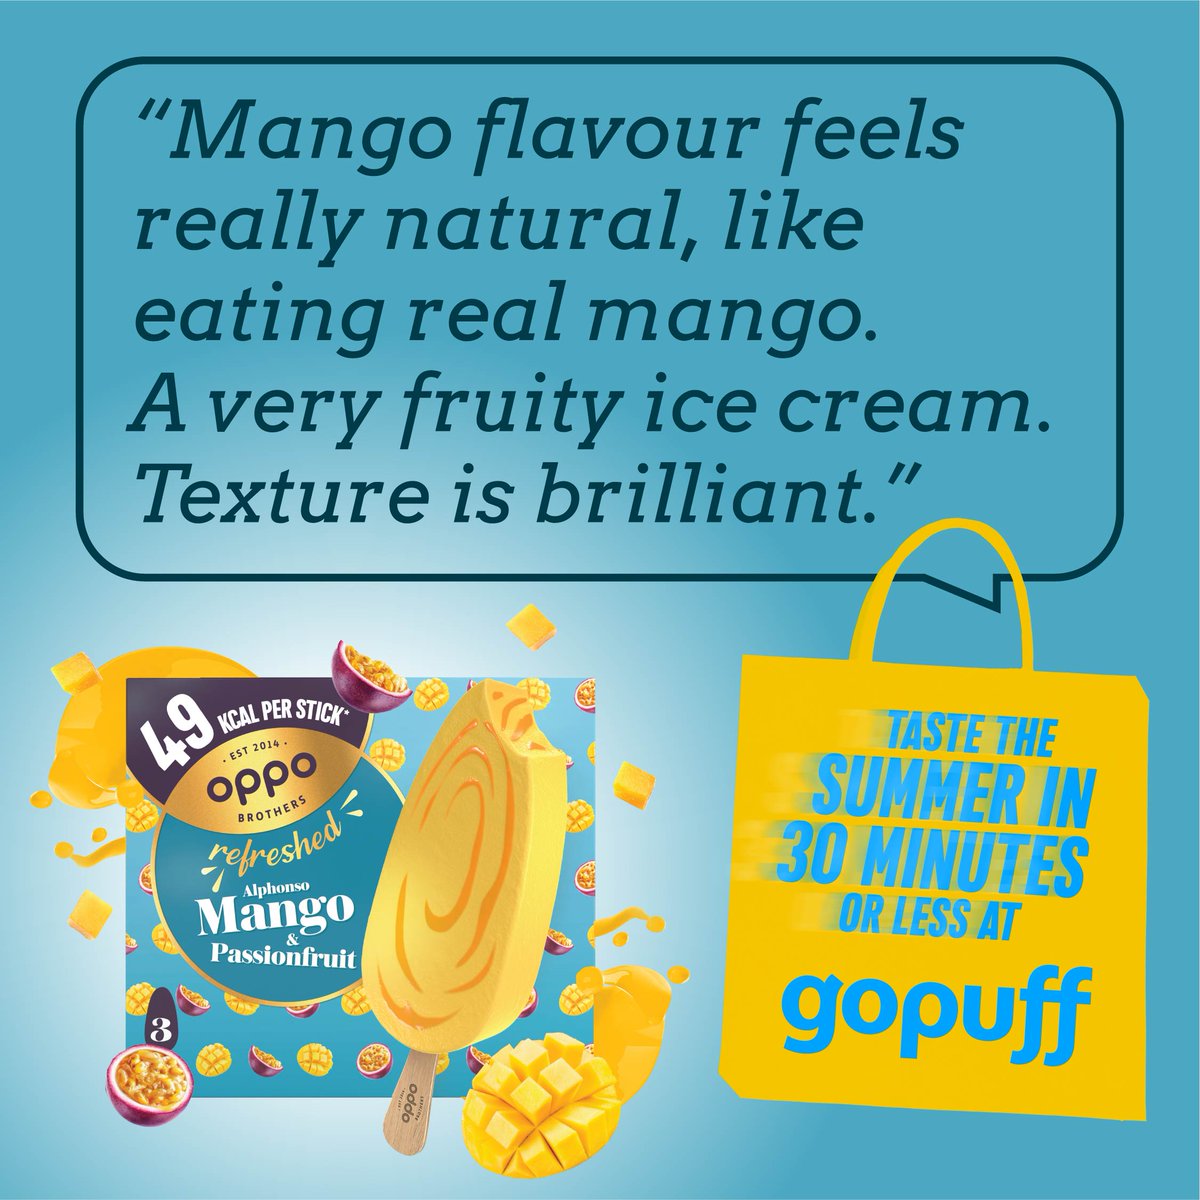 Don't just take our word for it 😉 feedback is coming in fast for our BRAND NEW range ☀ OPPO REFRESHED ☀ do you know what else is fast? Ordering on @gopuff! Enter OPPO15 at checkout for £15 OFF your first order* 👏 INDULGE. REFRESH. REPEAT. 🍦🌱 #IndulgeInLife